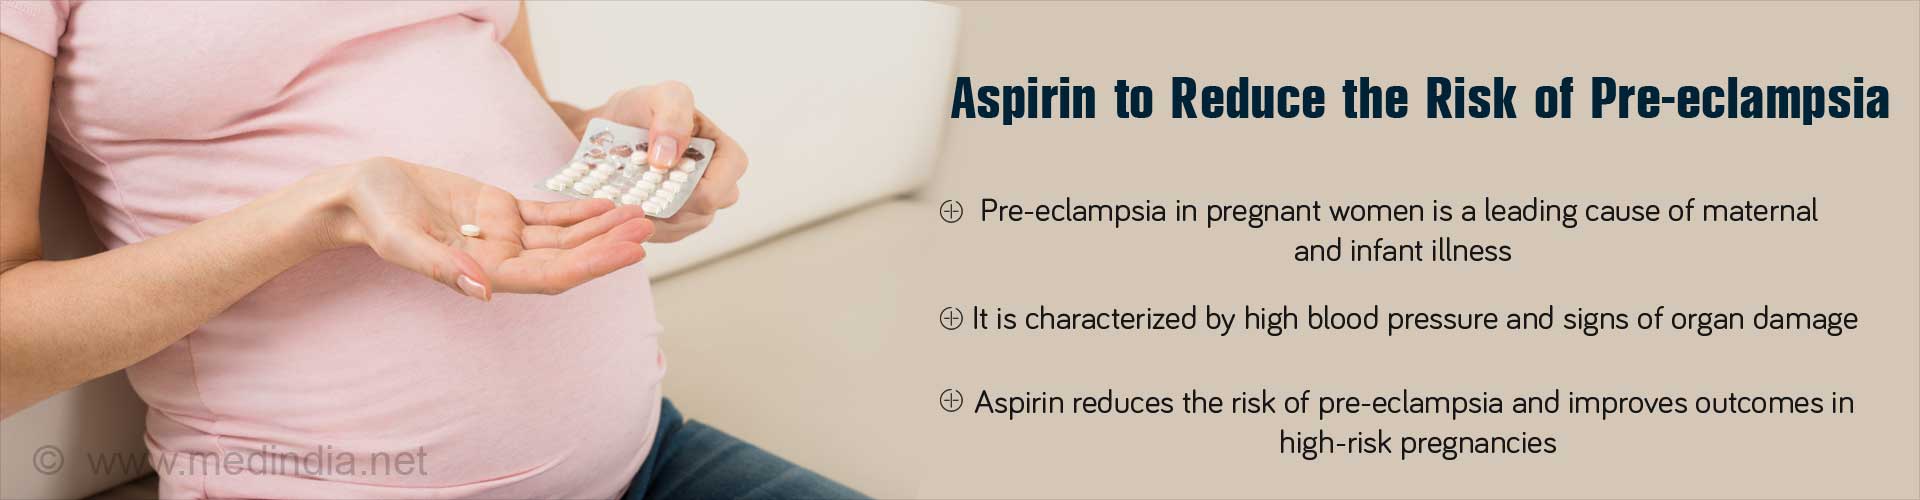 Aspirin to reduce the risk of pre-ecelampsia
- Pre-ecelampsia in pregnant women is a leading cause of maternal and infant illness
- It is characterized by high blood pressure and signs of organ damage
- Aspirin reduces the risk of pre-eclampsia and improves outcomes in high-risk pregnancies